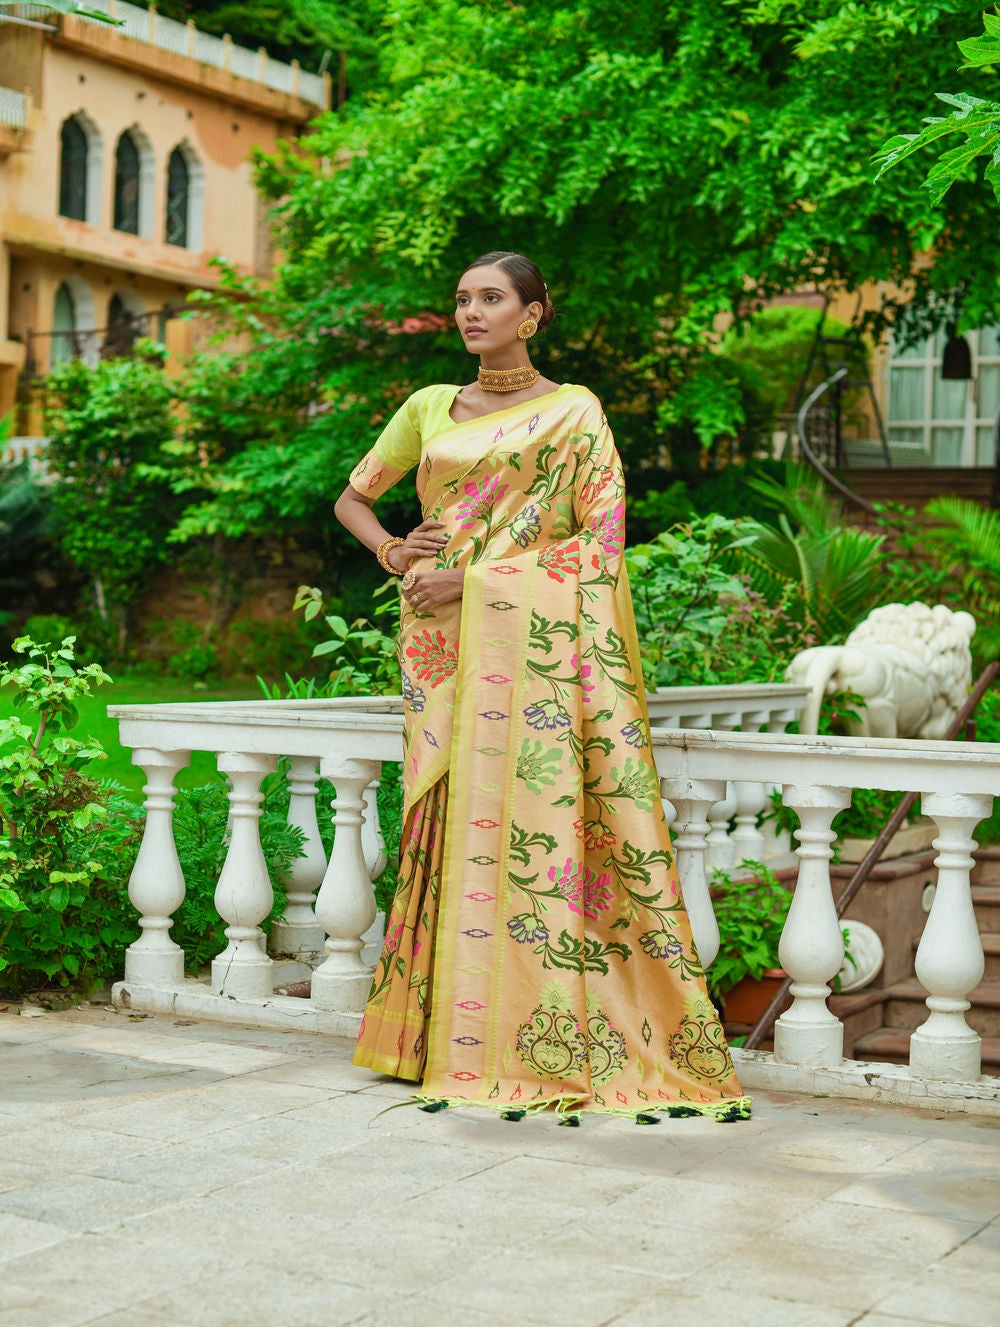 Where to buy paithani sarees in Pune - Om Paithani and Sarees